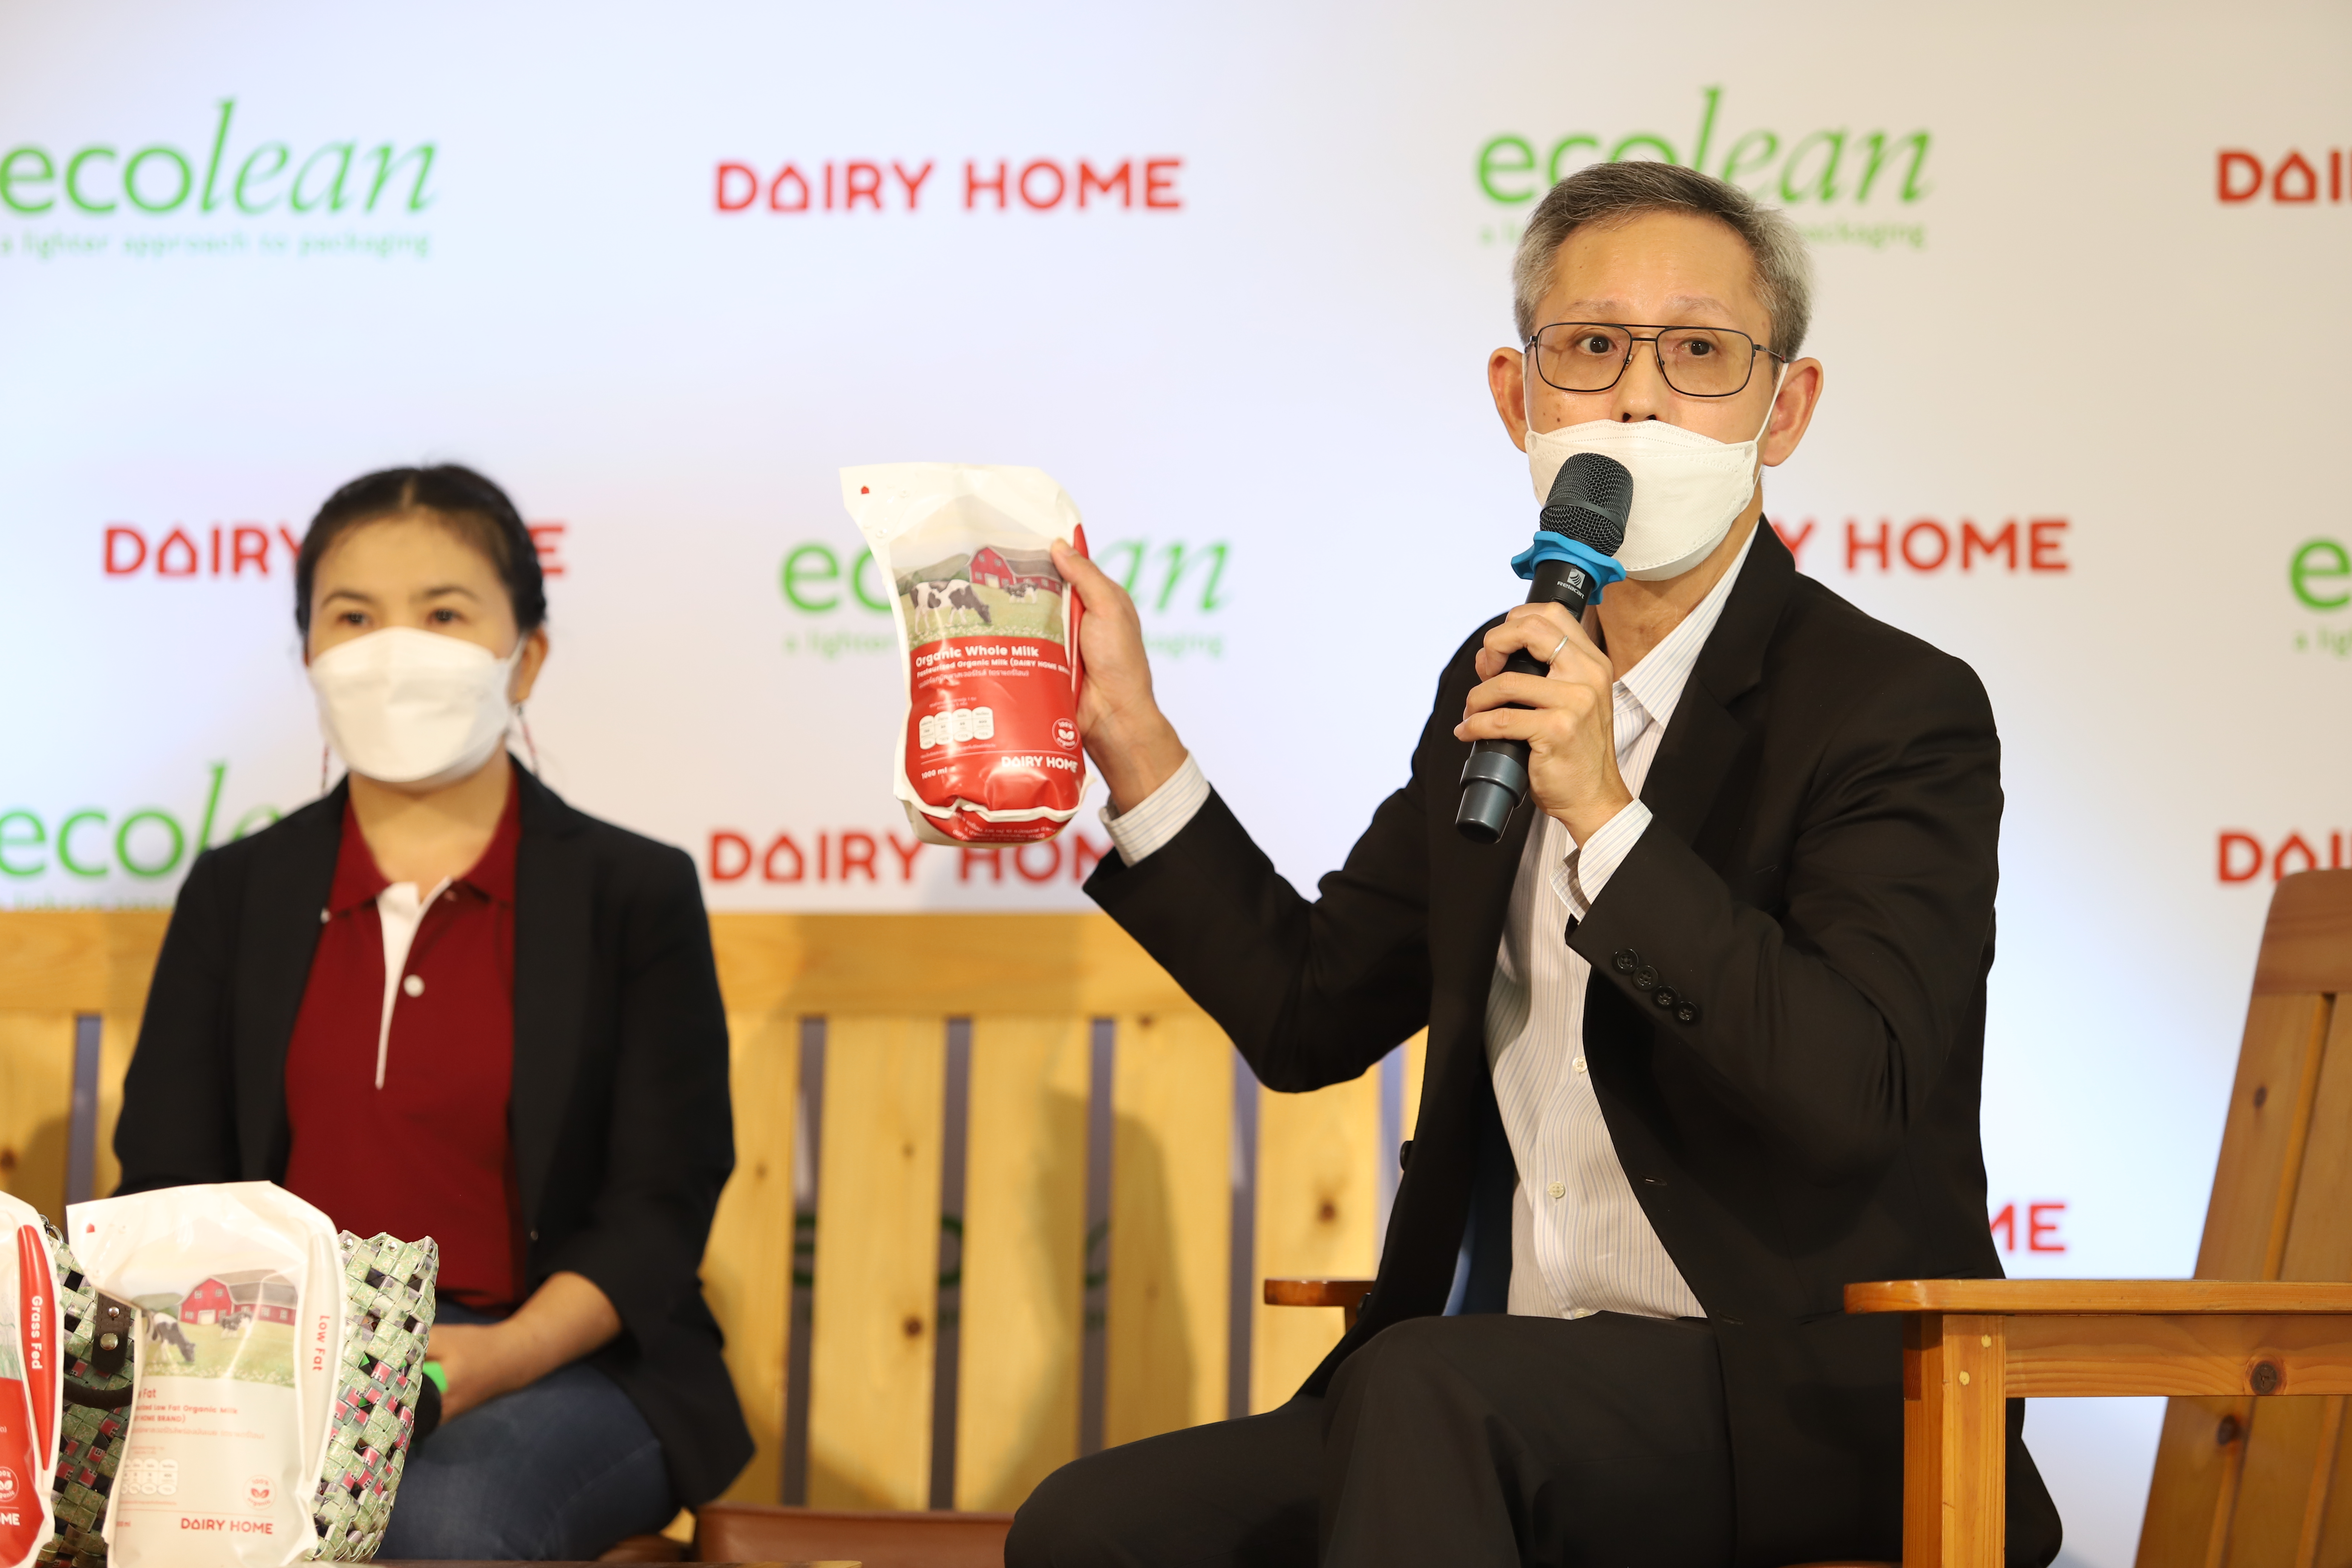 Ecolean joins forces with Dairy Home to promote green development